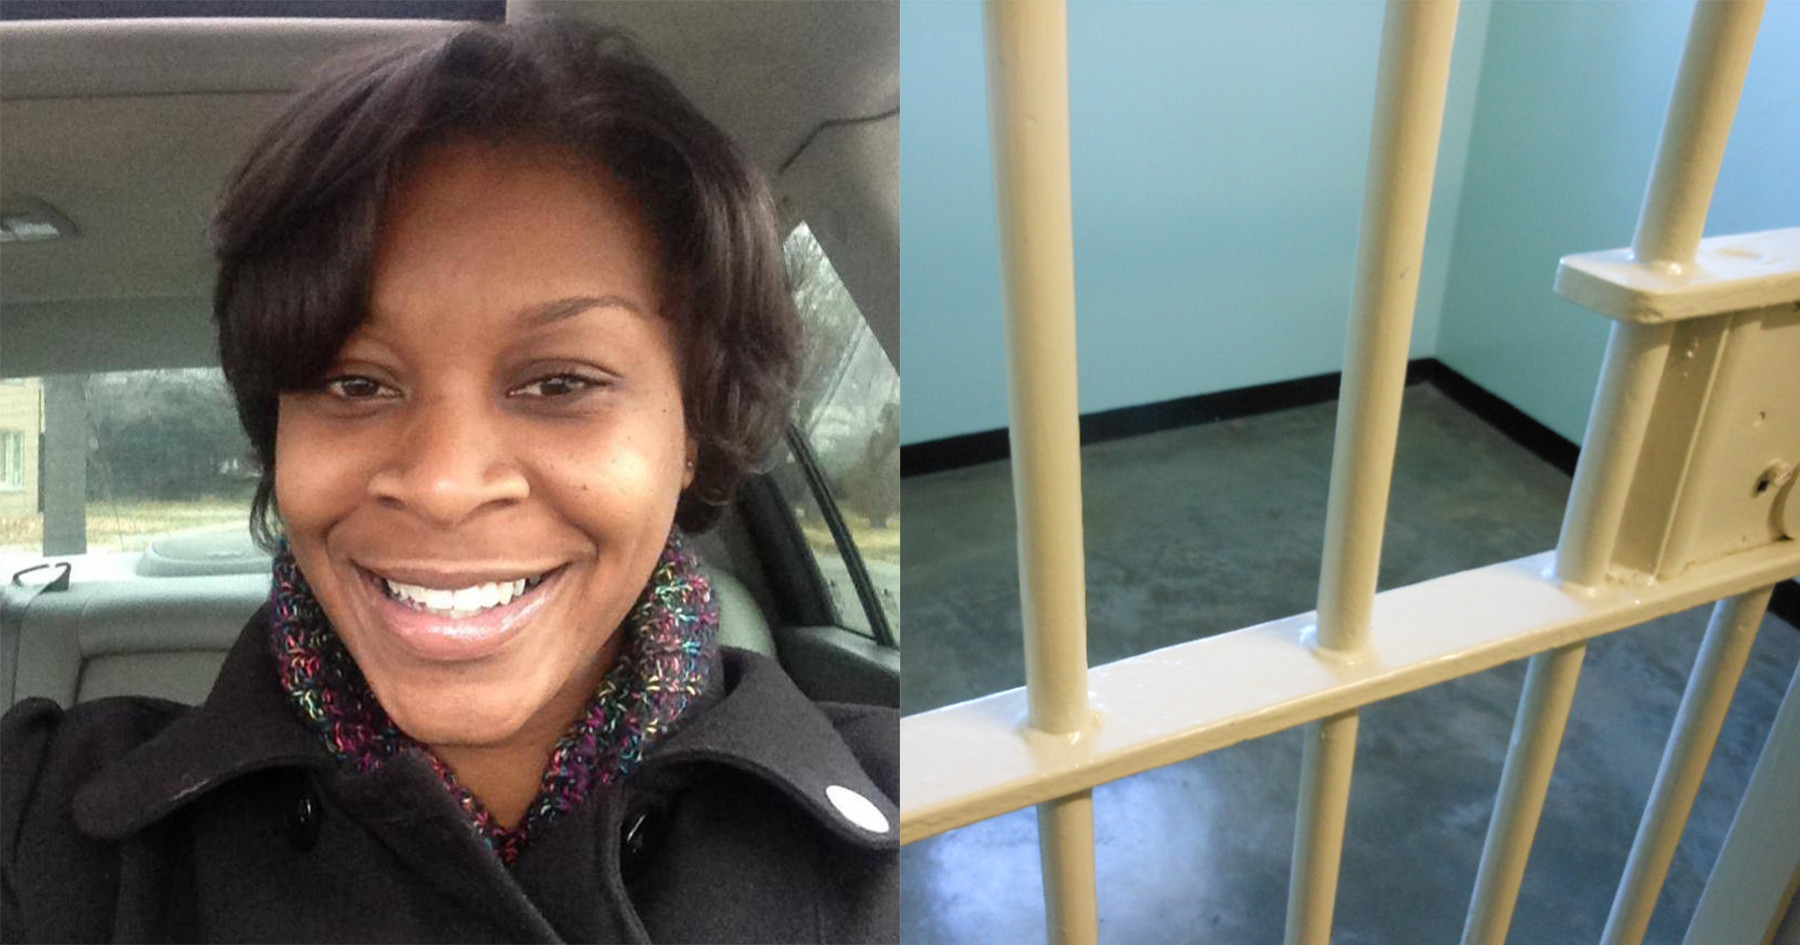 Texas: "Weed Contributed to Sandra Bland's Death"